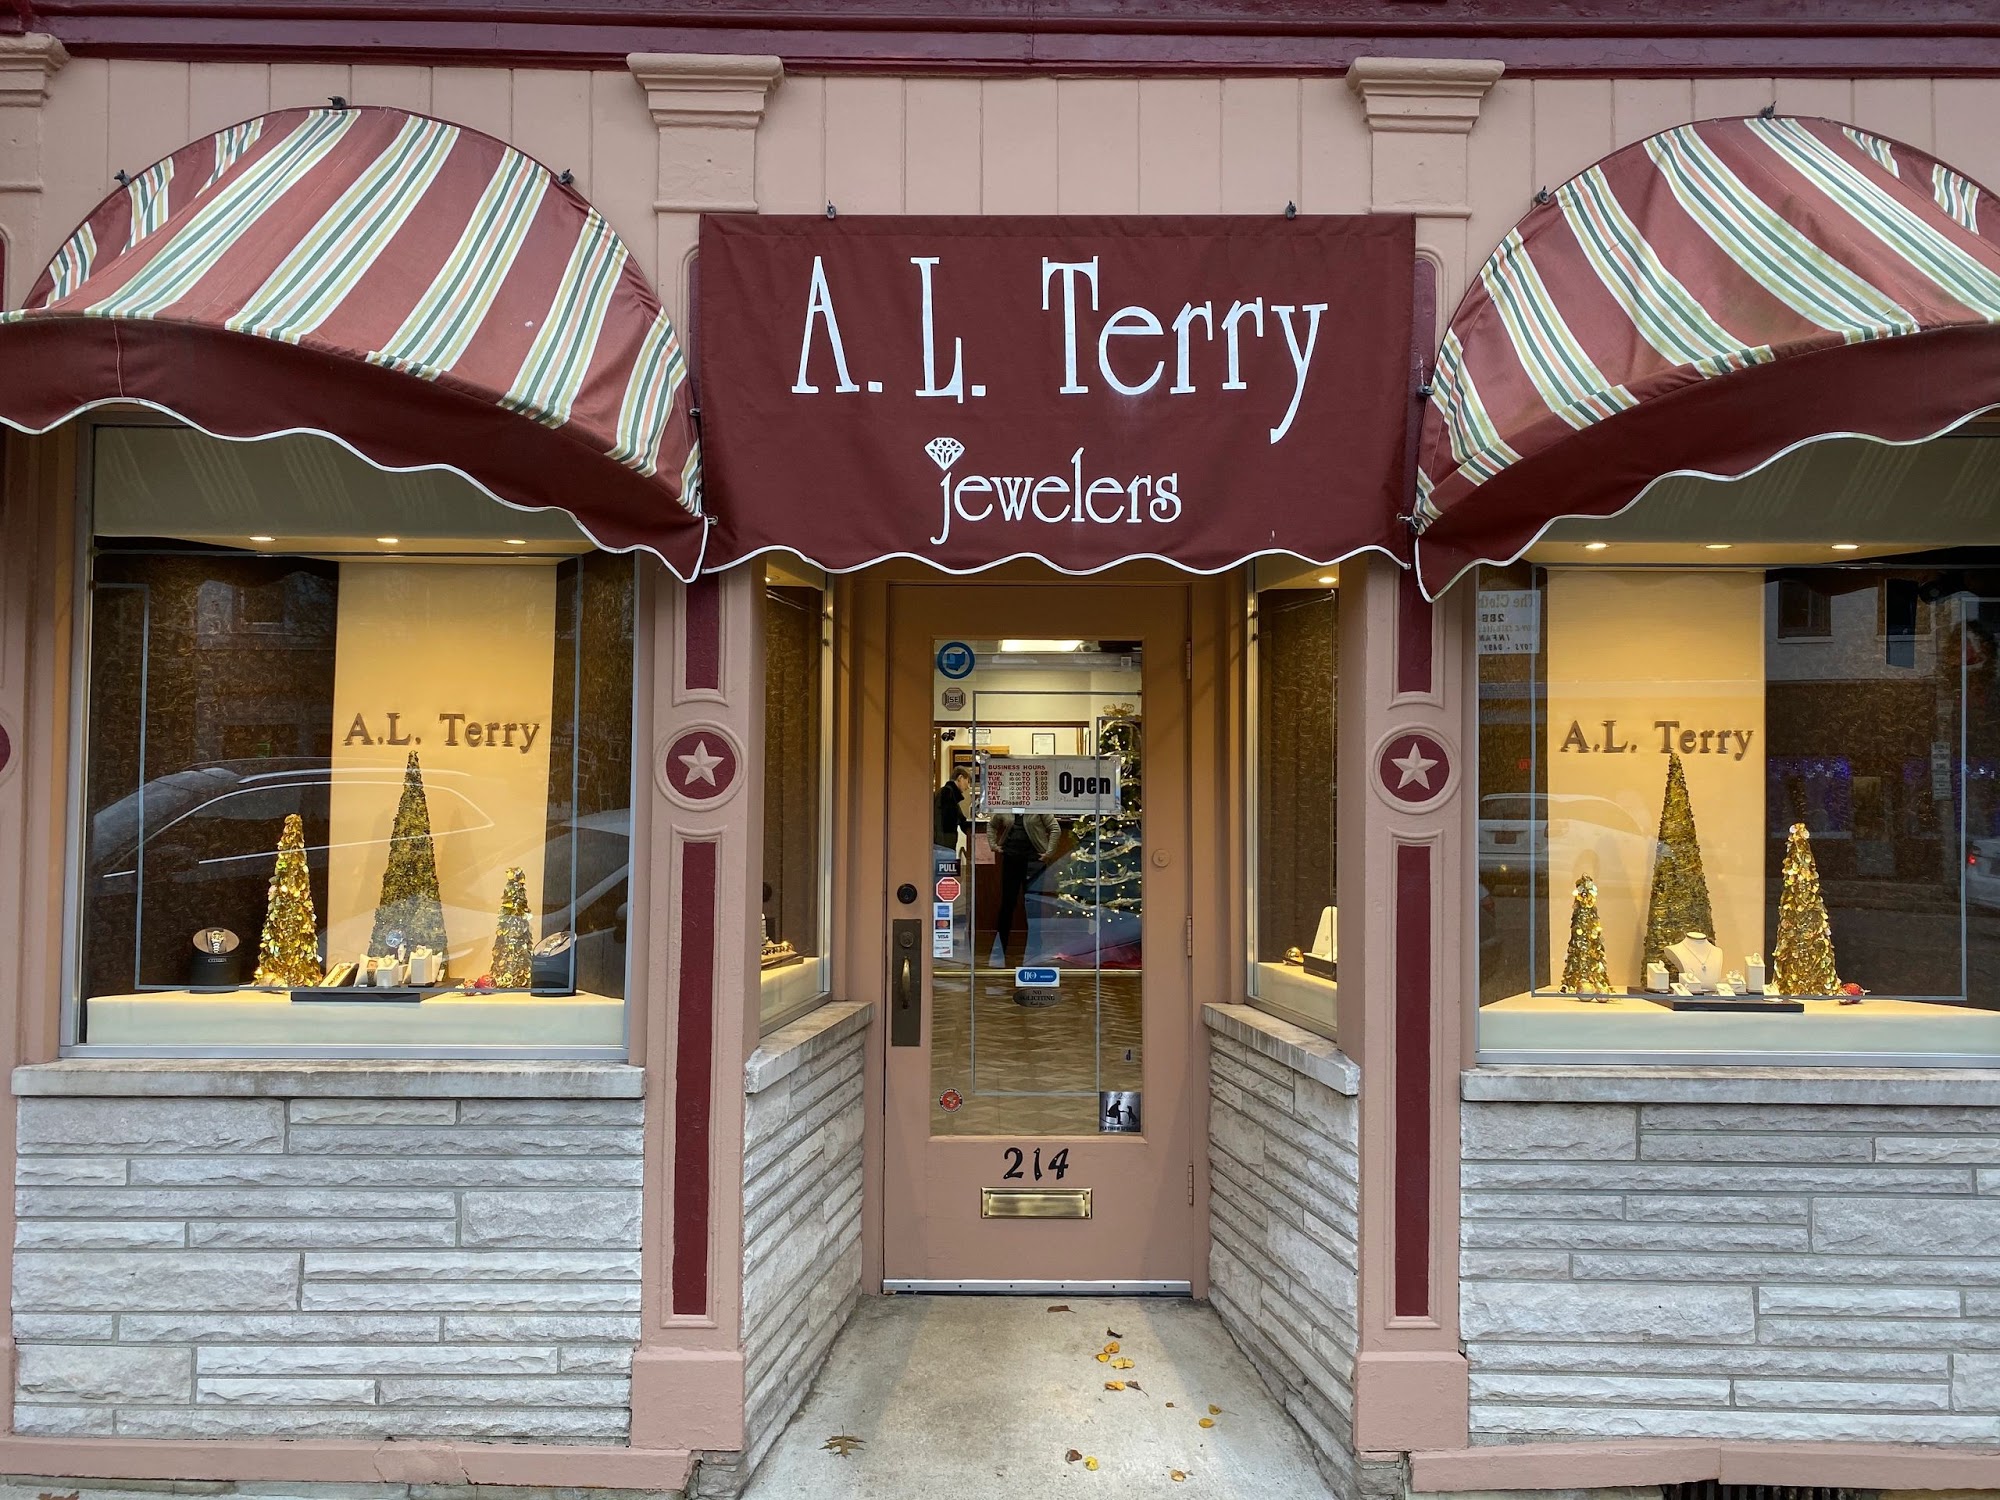 A.L. Terry Jewelers